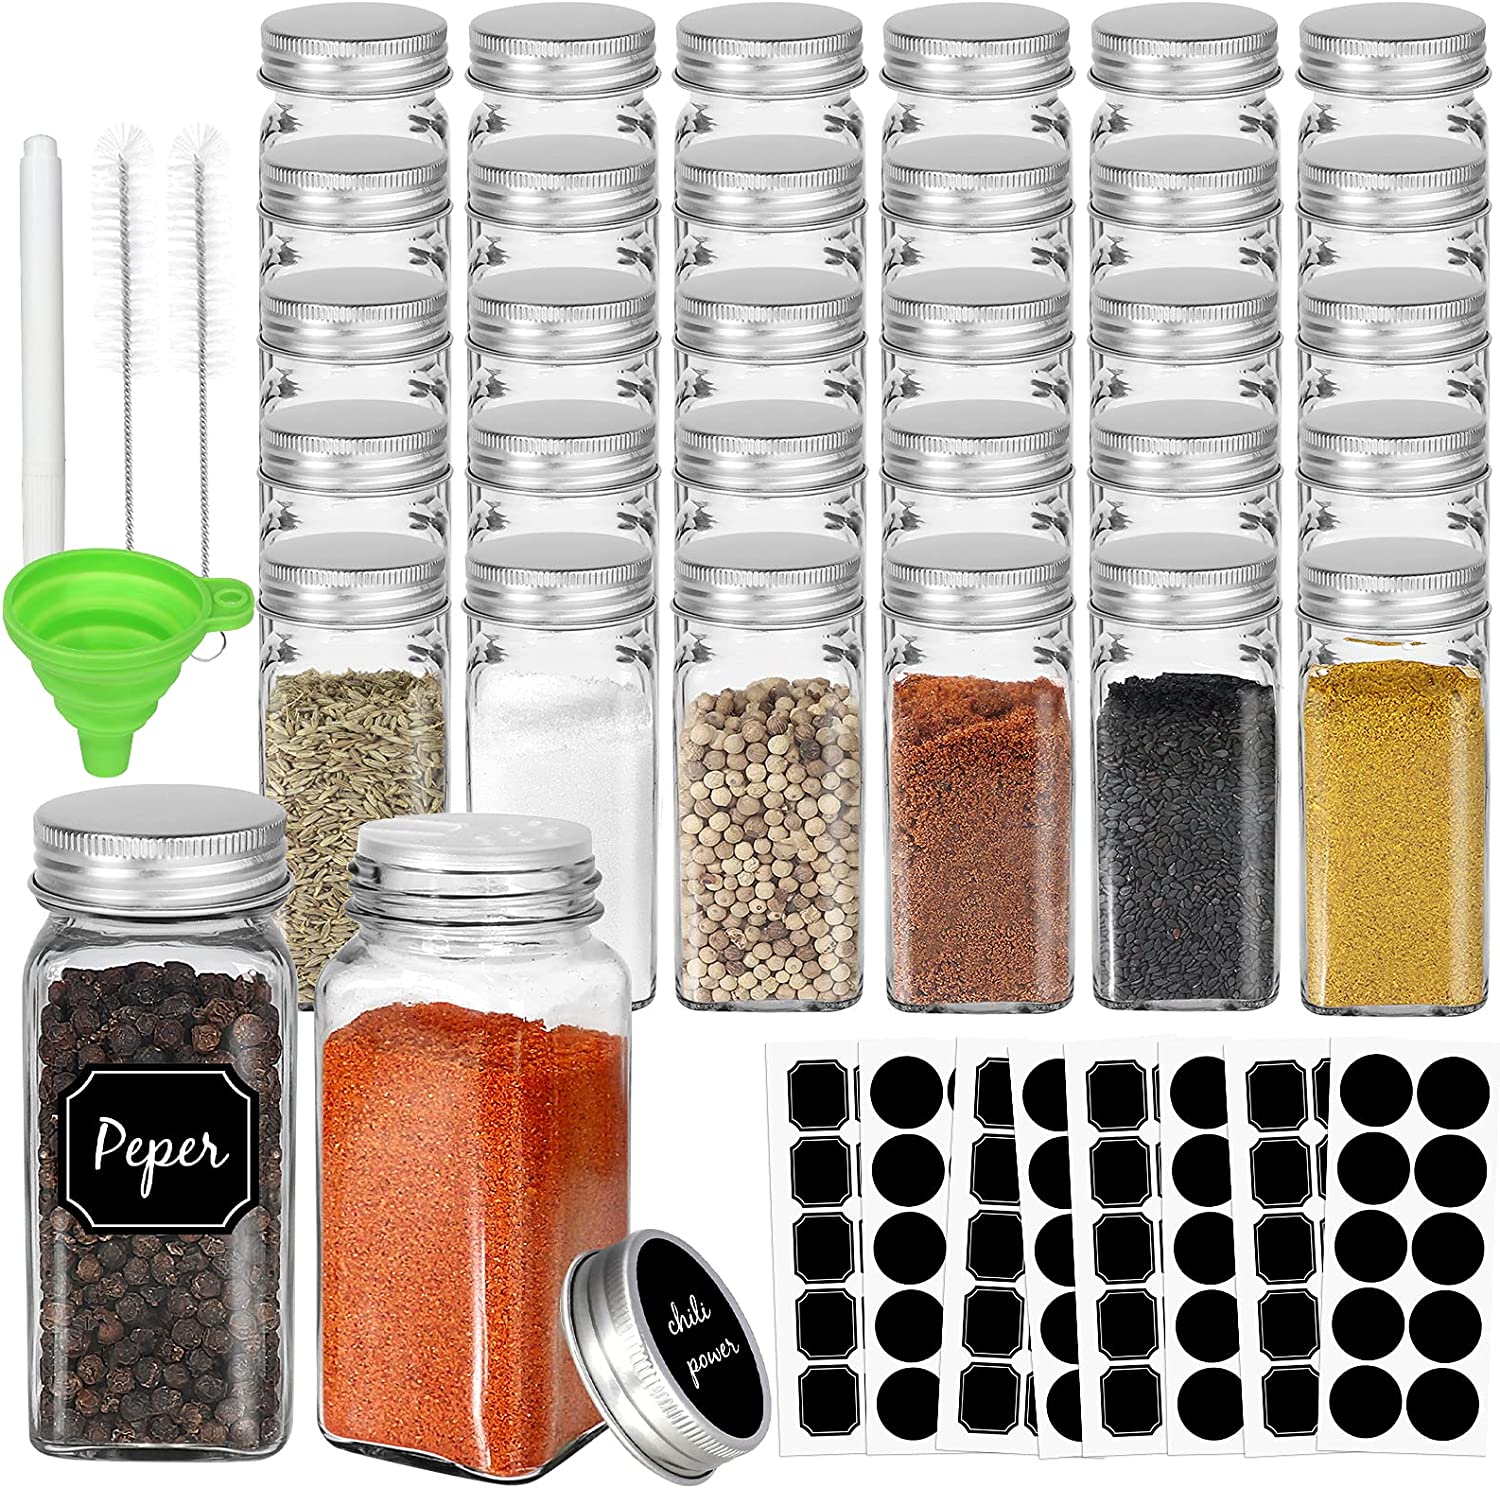 https://www.dontwasteyourmoney.com/wp-content/uploads/2023/02/cyclemore-silicone-funnel-metal-caps-spice-jars-30-pack-spice-jars.jpg